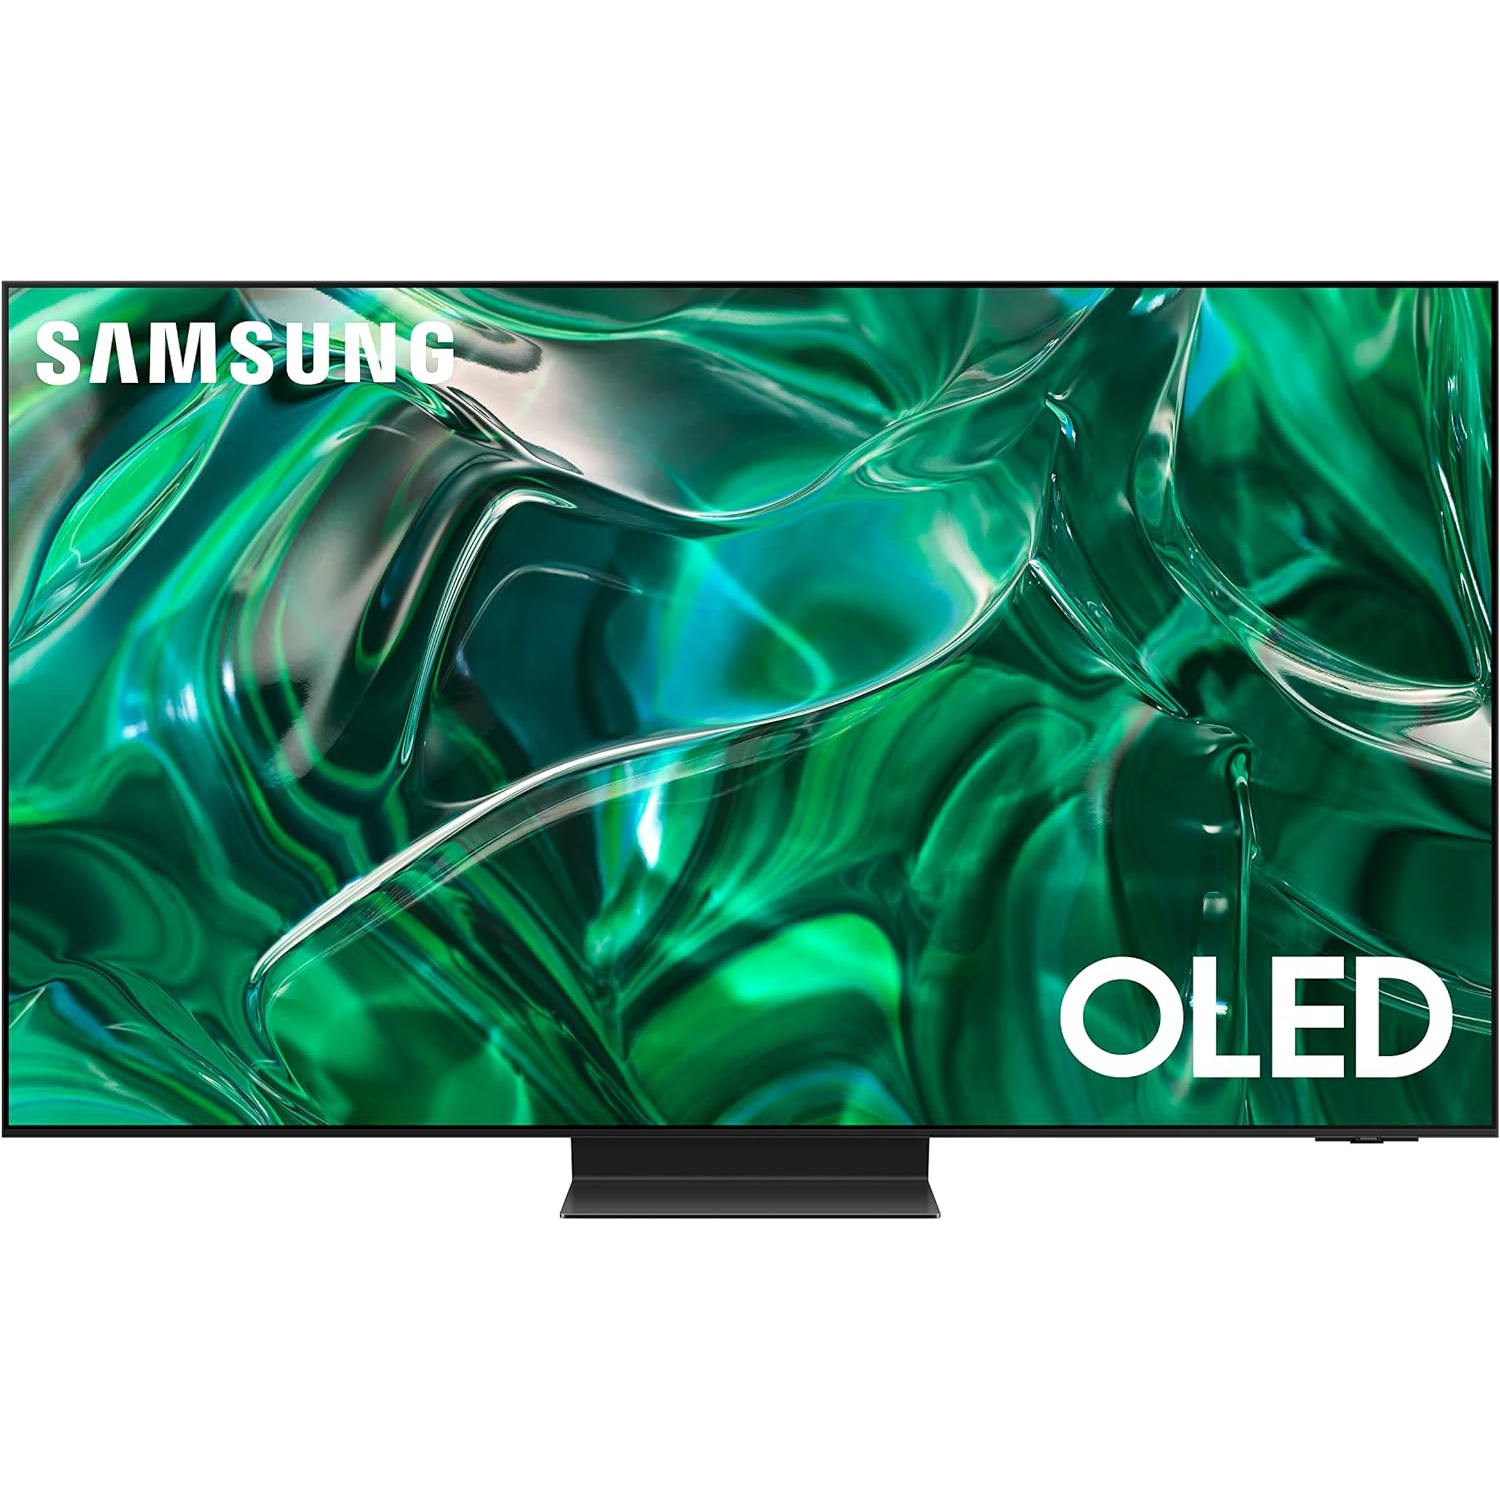 SAMSUNG 65-Inch Class OLED 4K S95C Series, Quantum HDR, Object Tracking Sound+, Q Symphony, Gaming Hub, w/Alexa Built-in - [QN65S95CAFXZC] - Open Box - 10/10 Condition